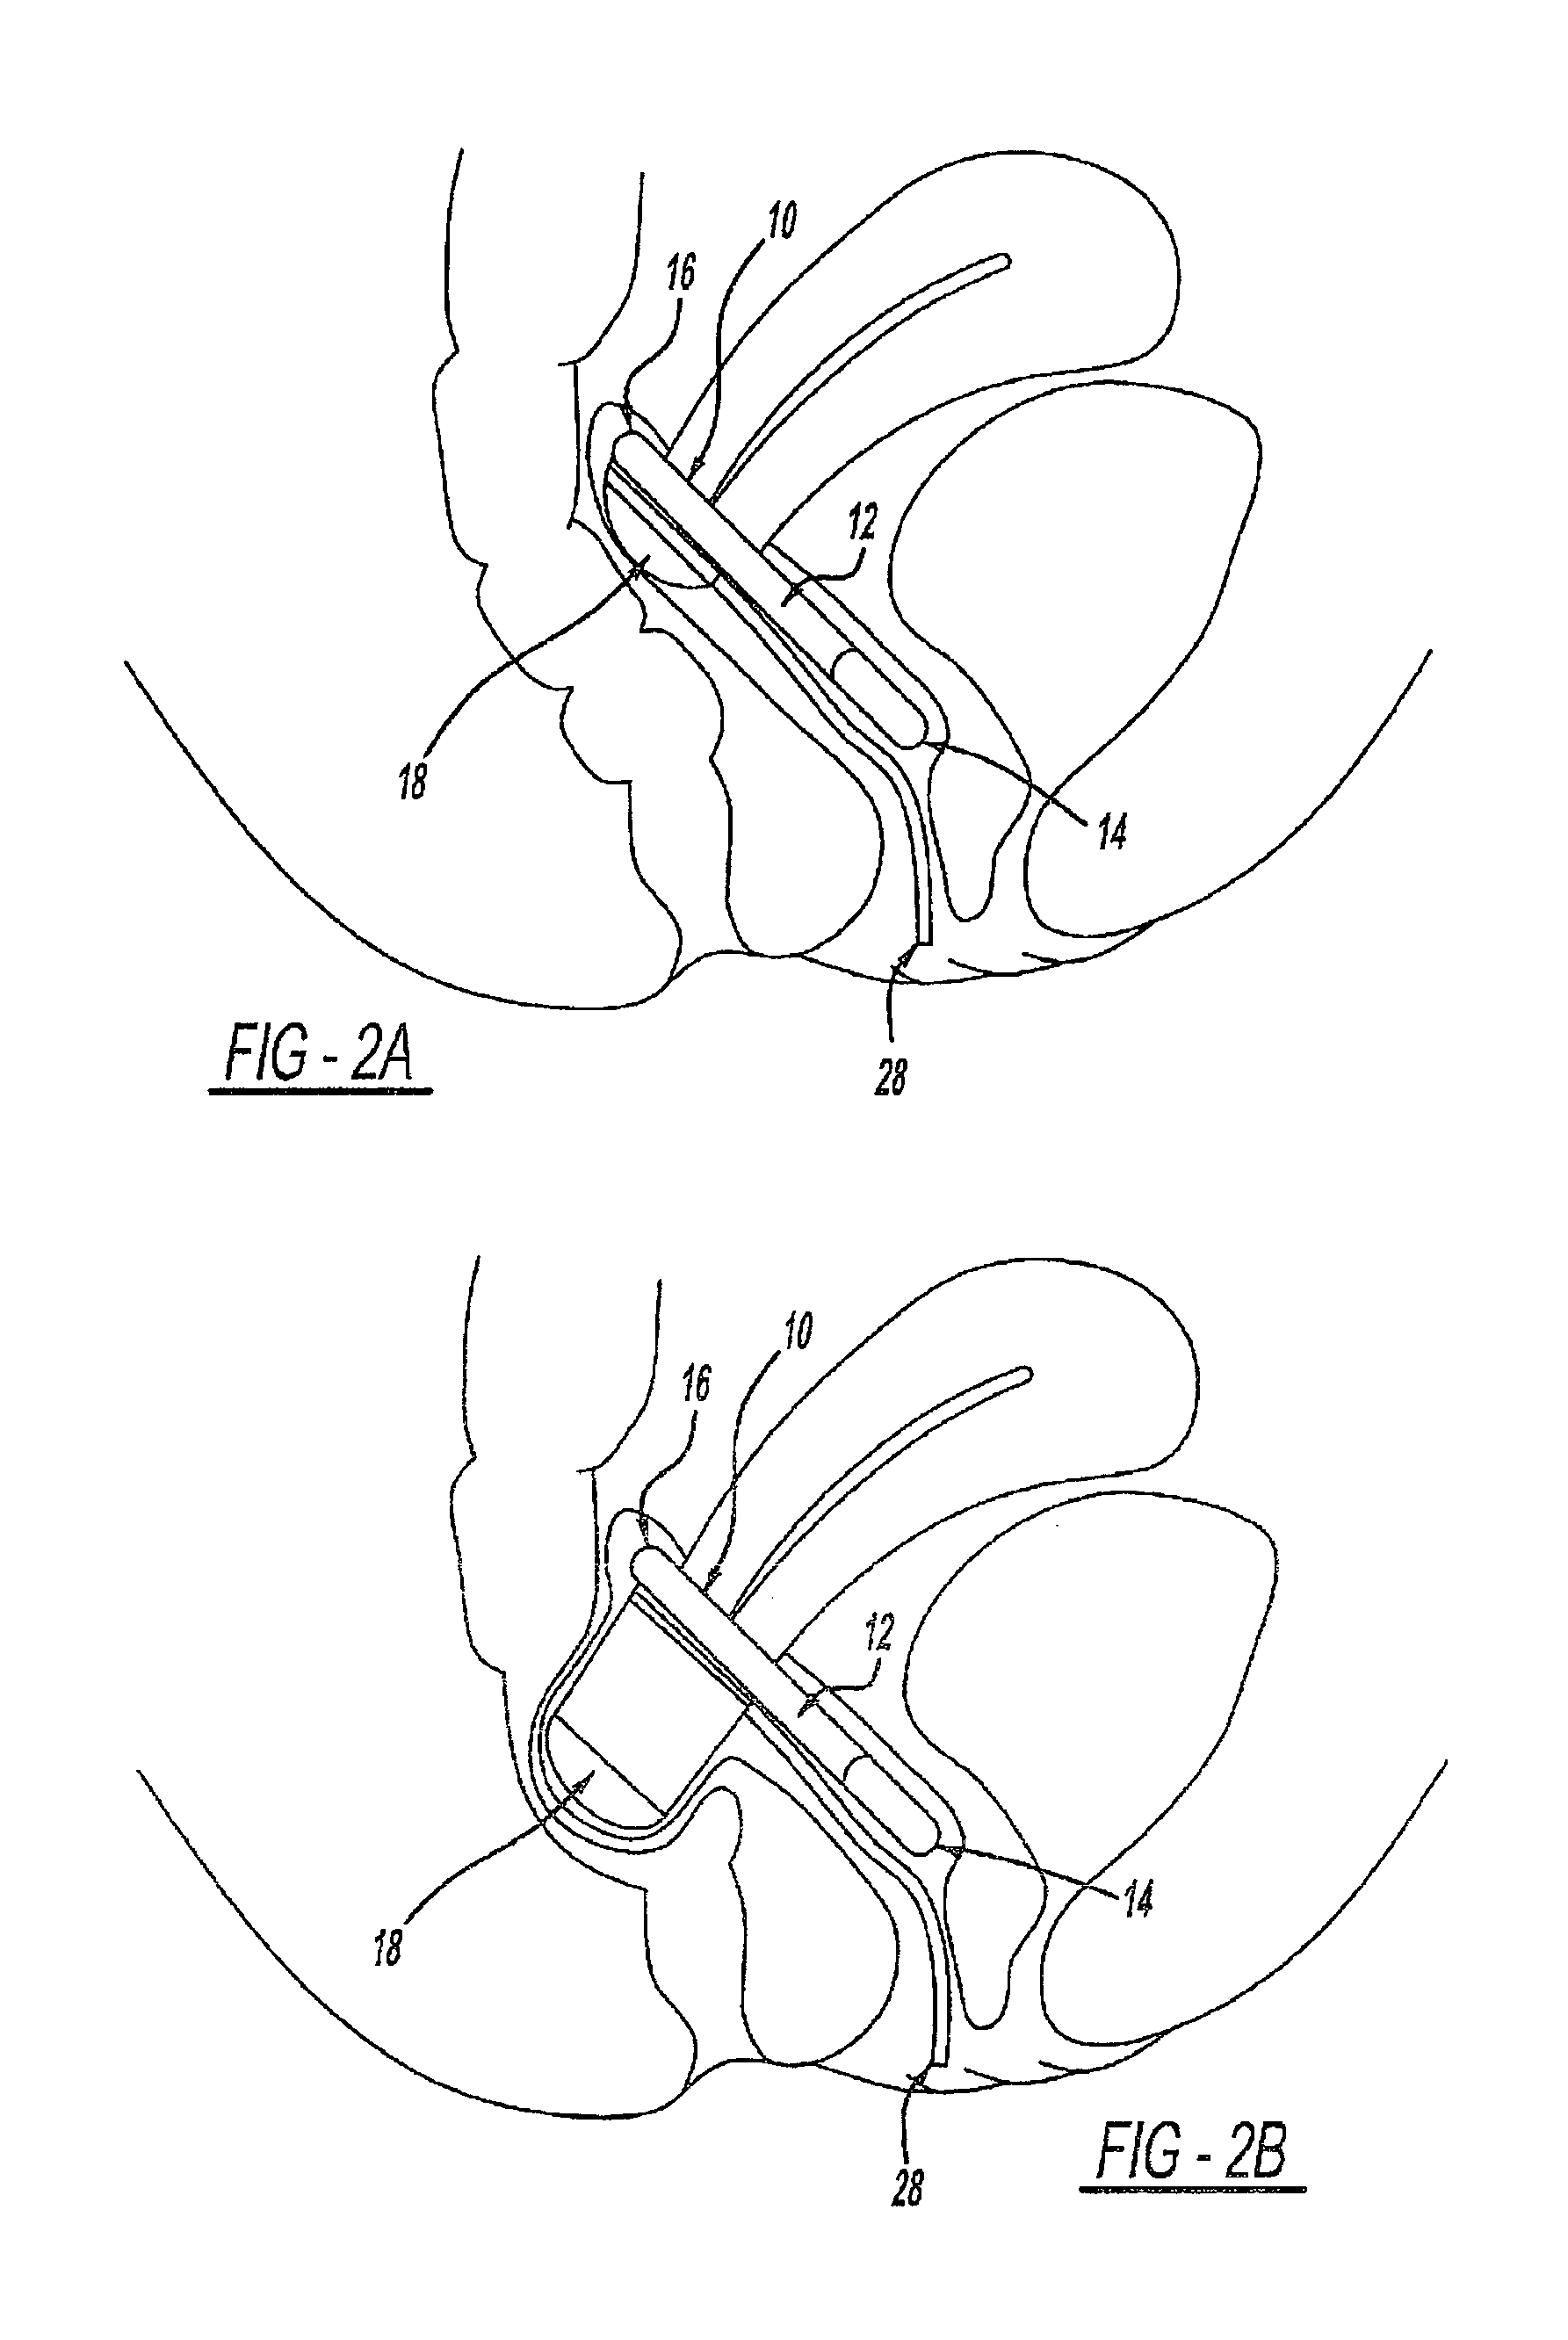 Intra-vaginal device for fecal incontinence